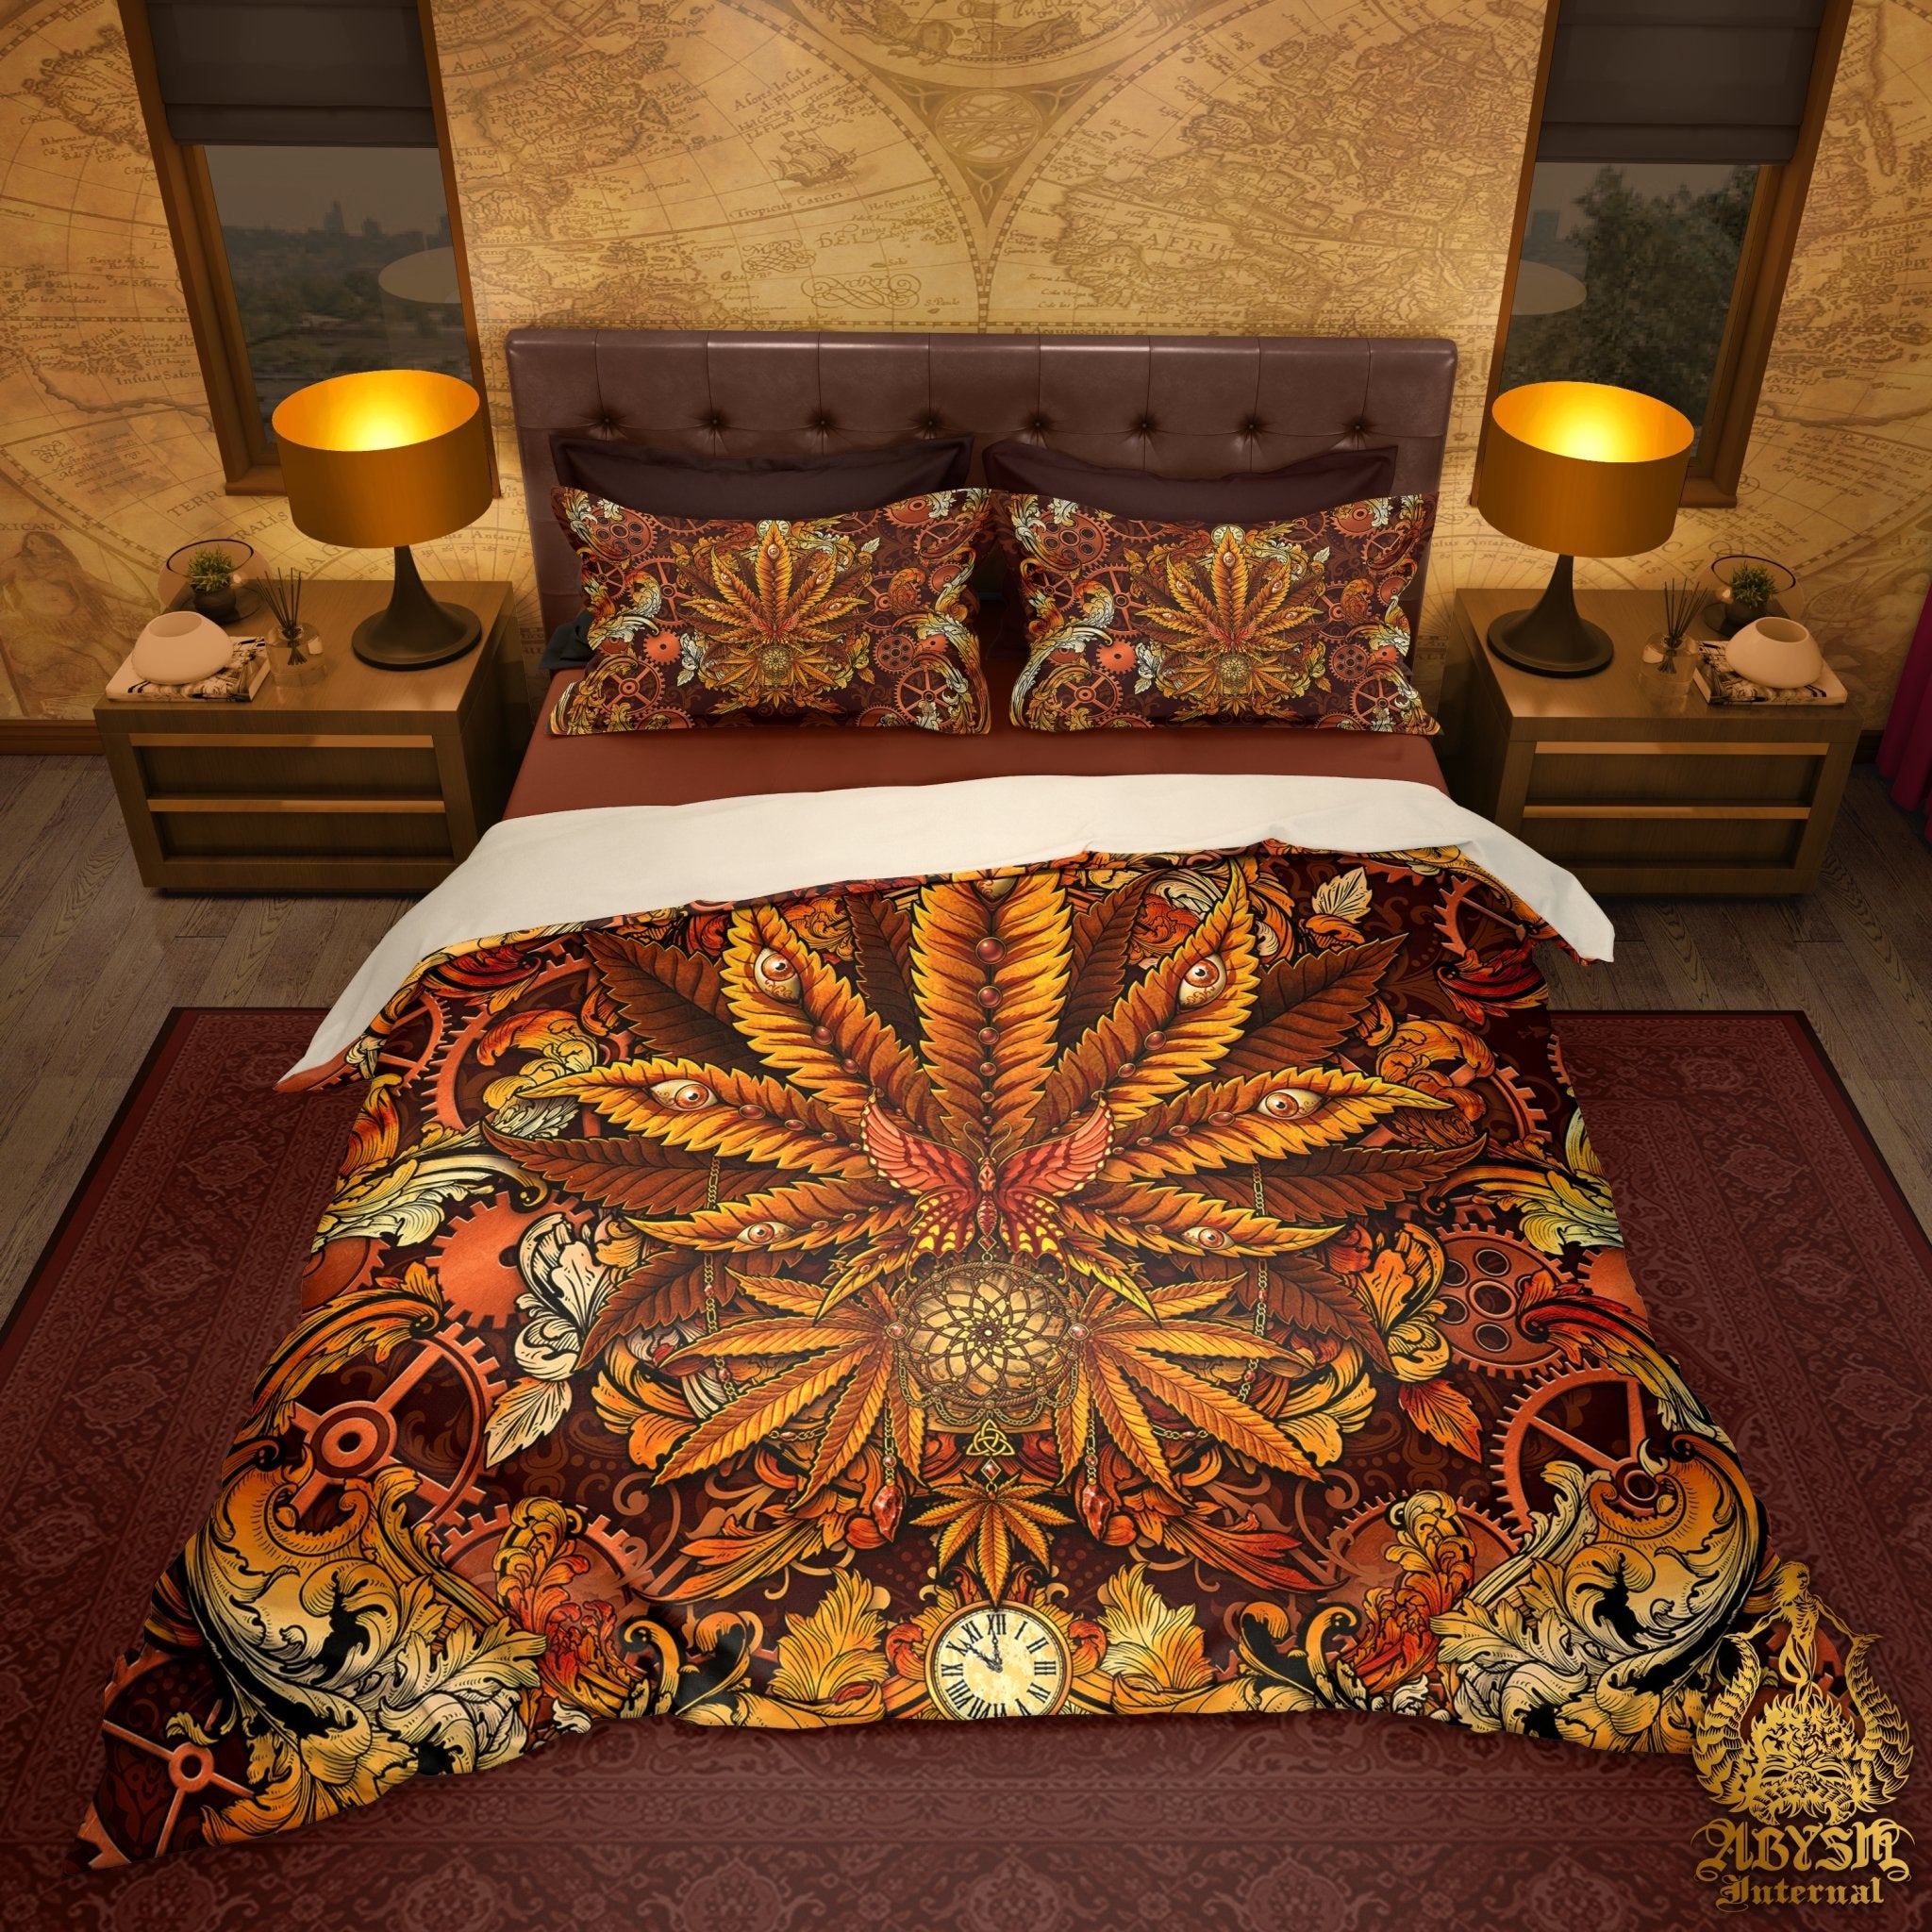 Weed Bedding Set, Comforter and Duvet, Cannabis Bed Cover, Marijuana Bedroom Decor, King, Queen and Twin Size, 420 Room Art - Steampunk - Abysm Internal